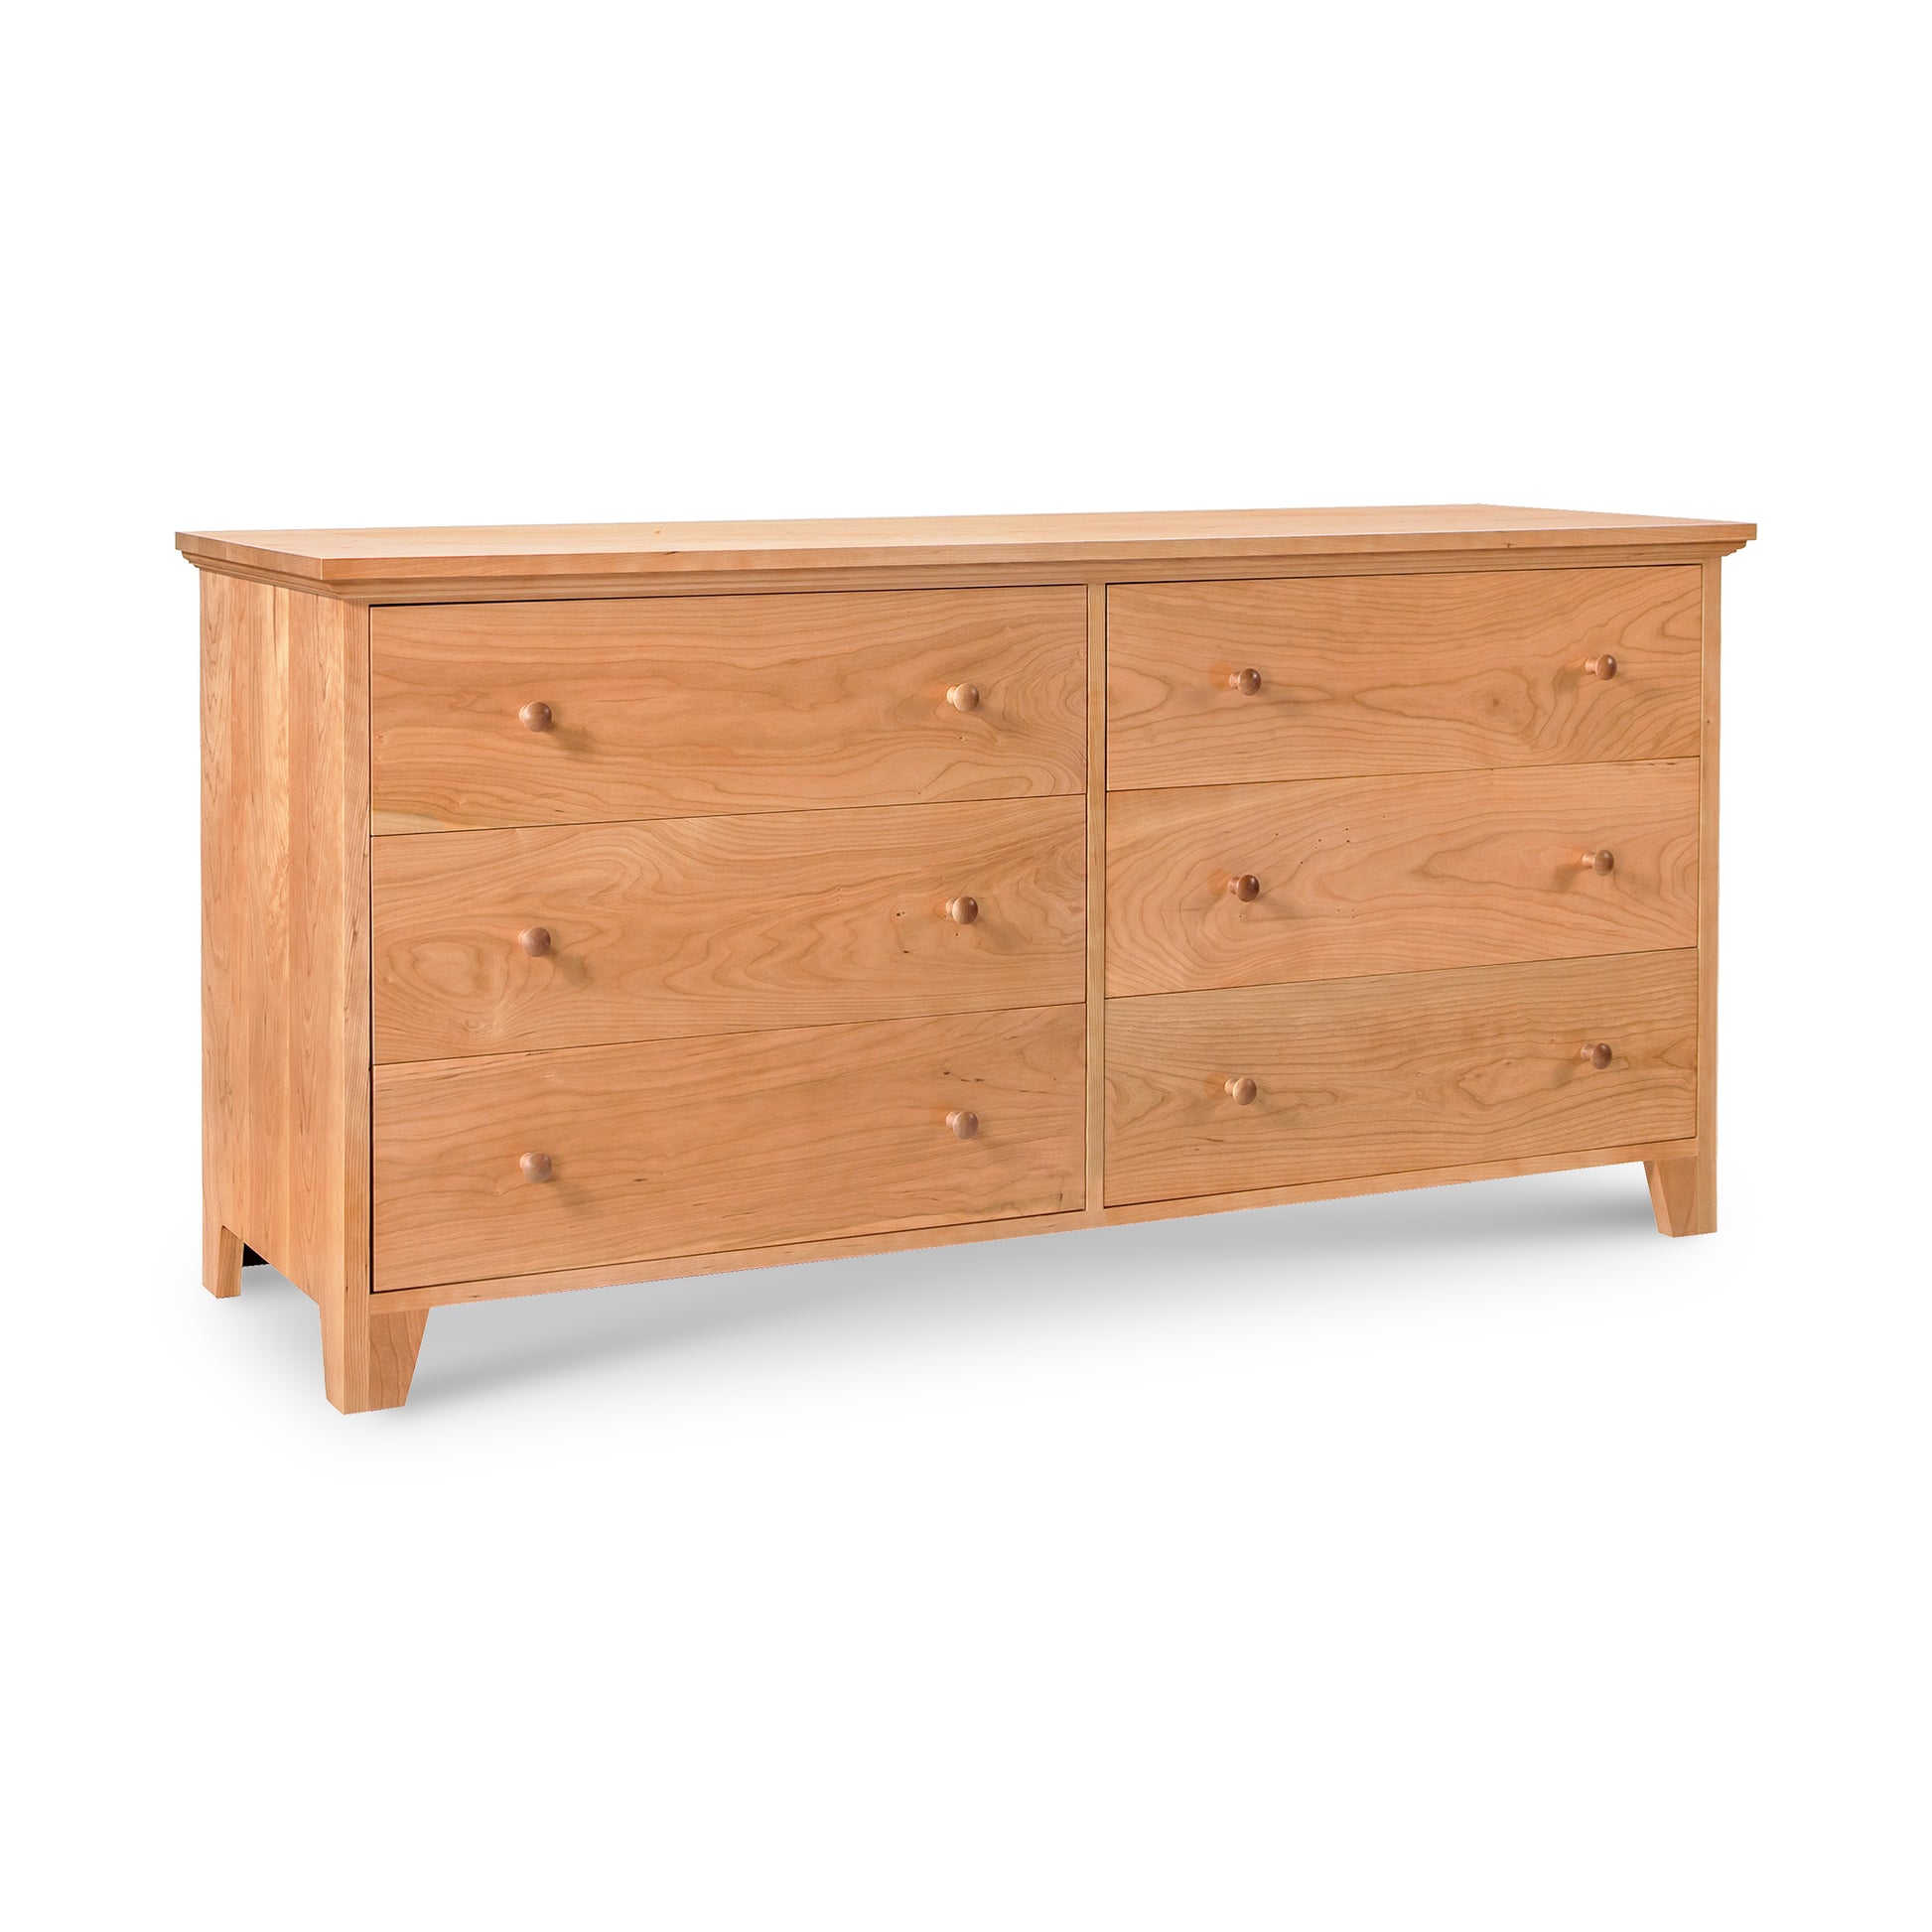 A Lyndon Furniture American Country 6-Drawer Dresser made of solid wood, displayed on a white background.